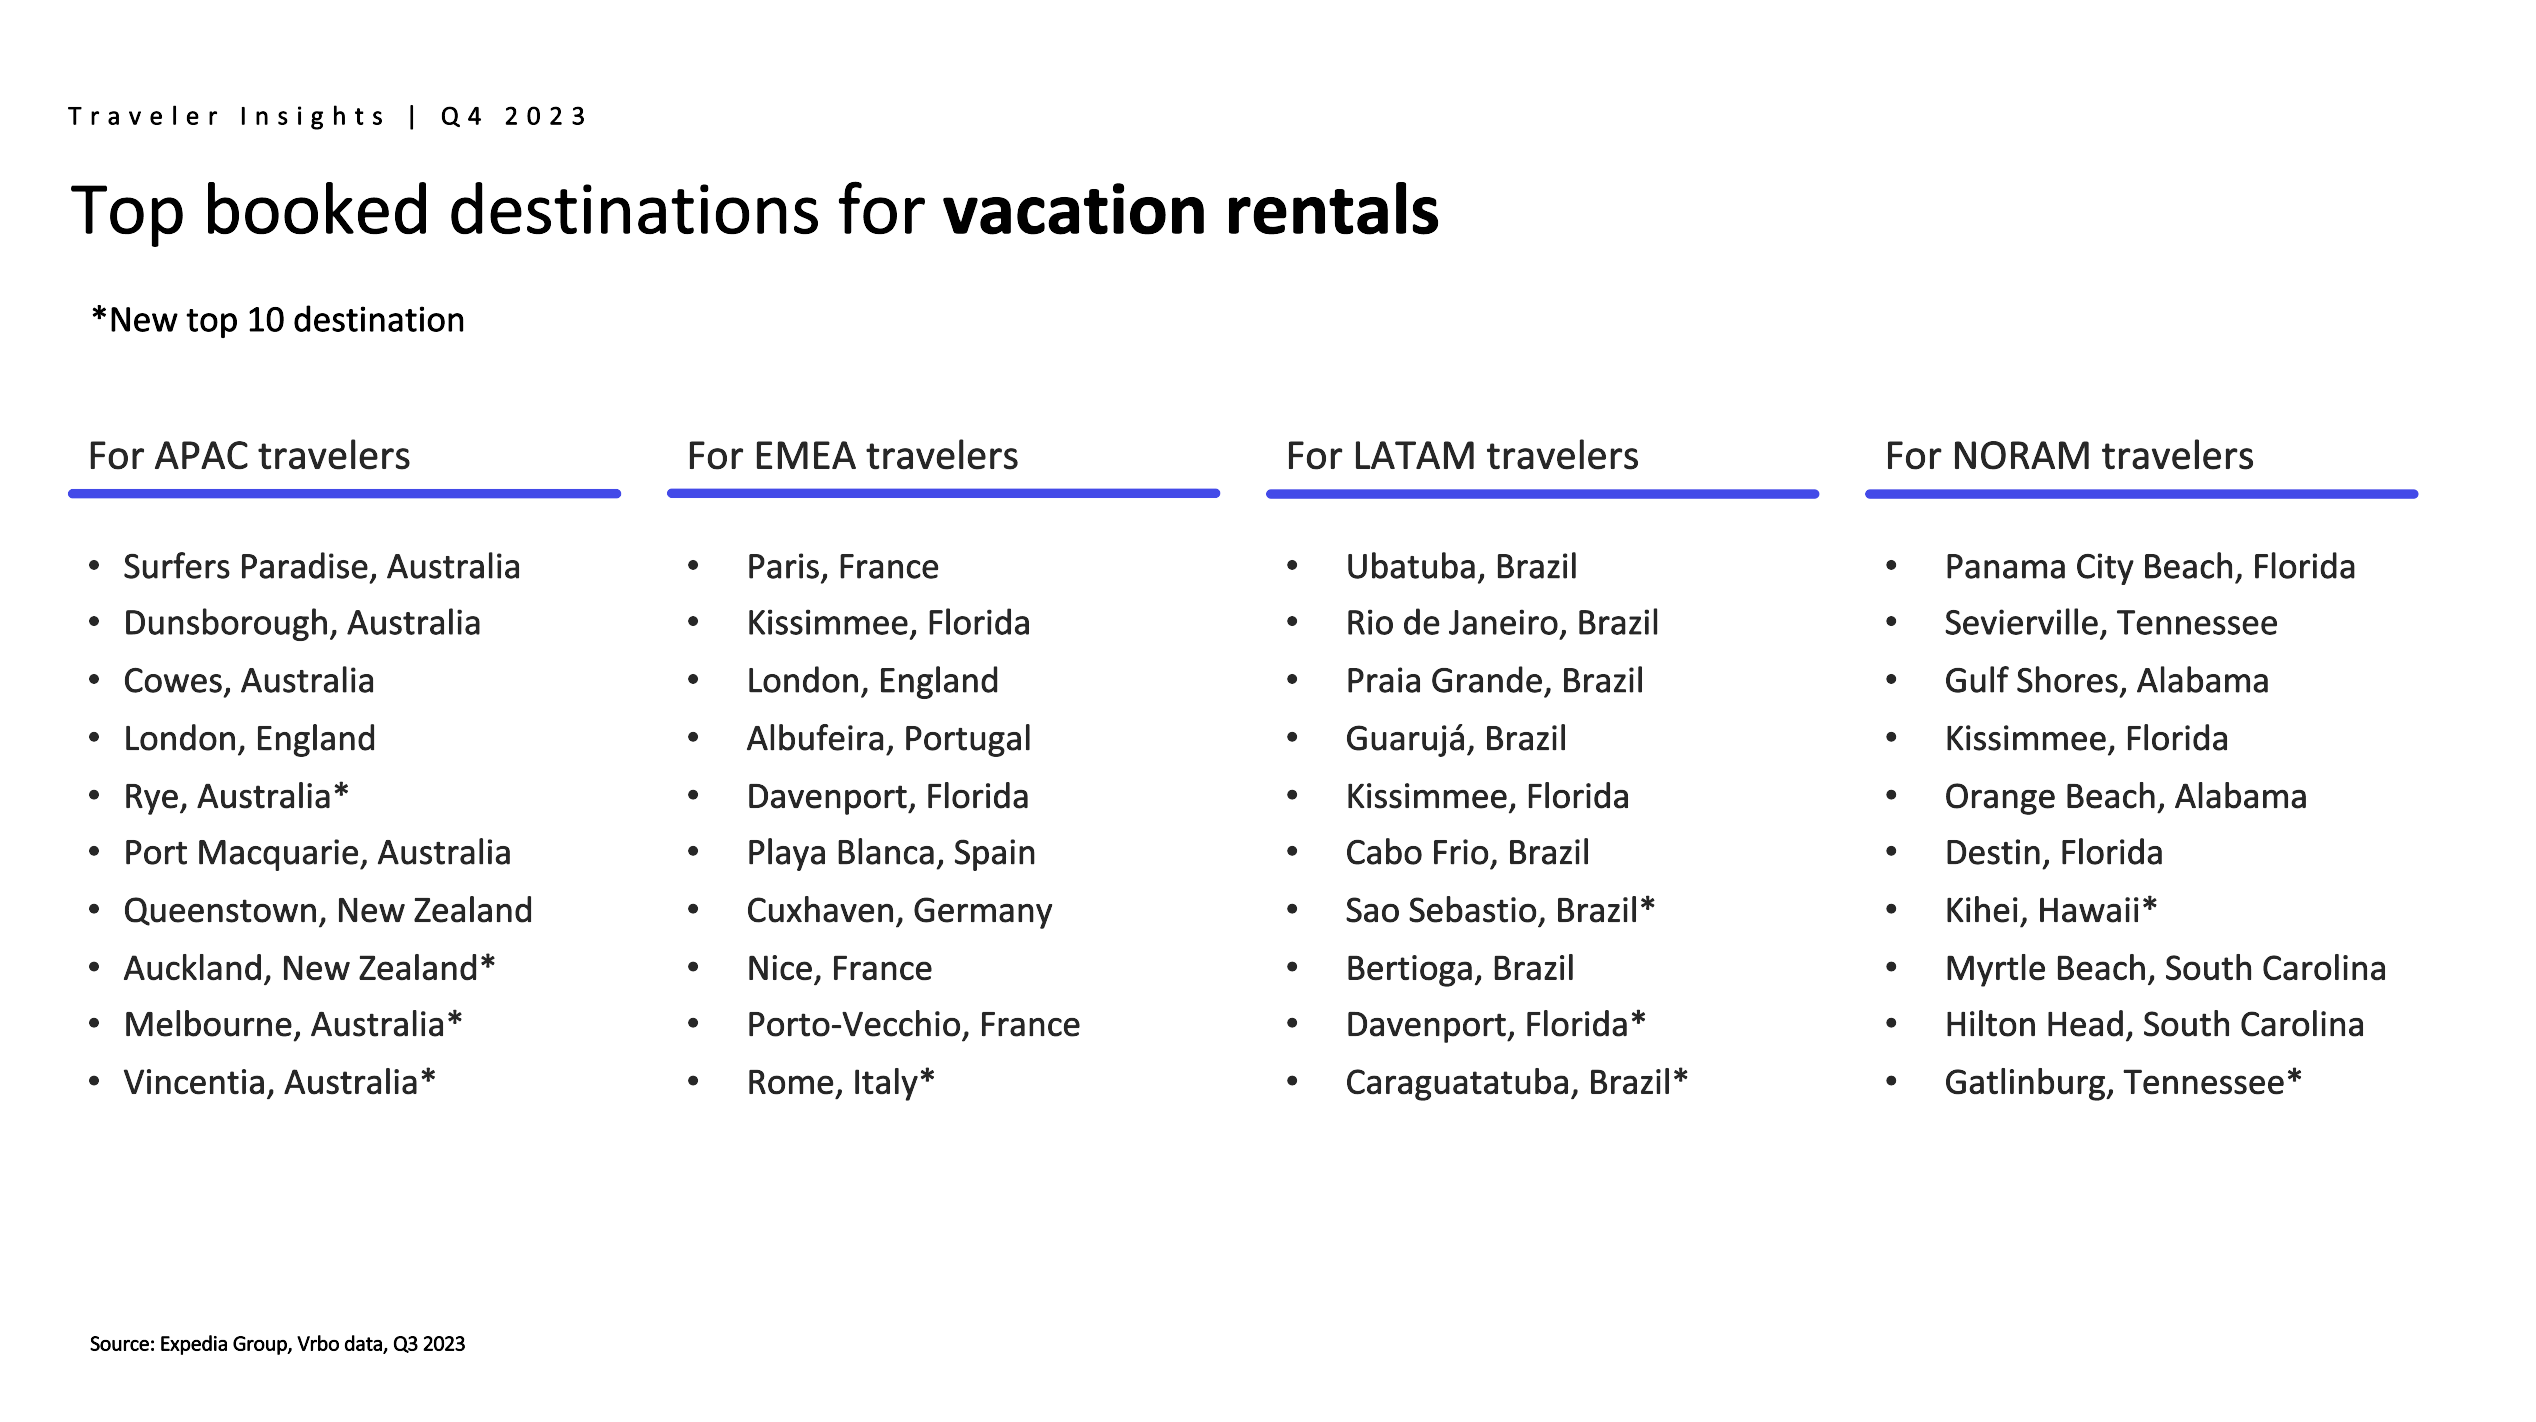 Chart showing top booked destinations for vacation rentals across global regions